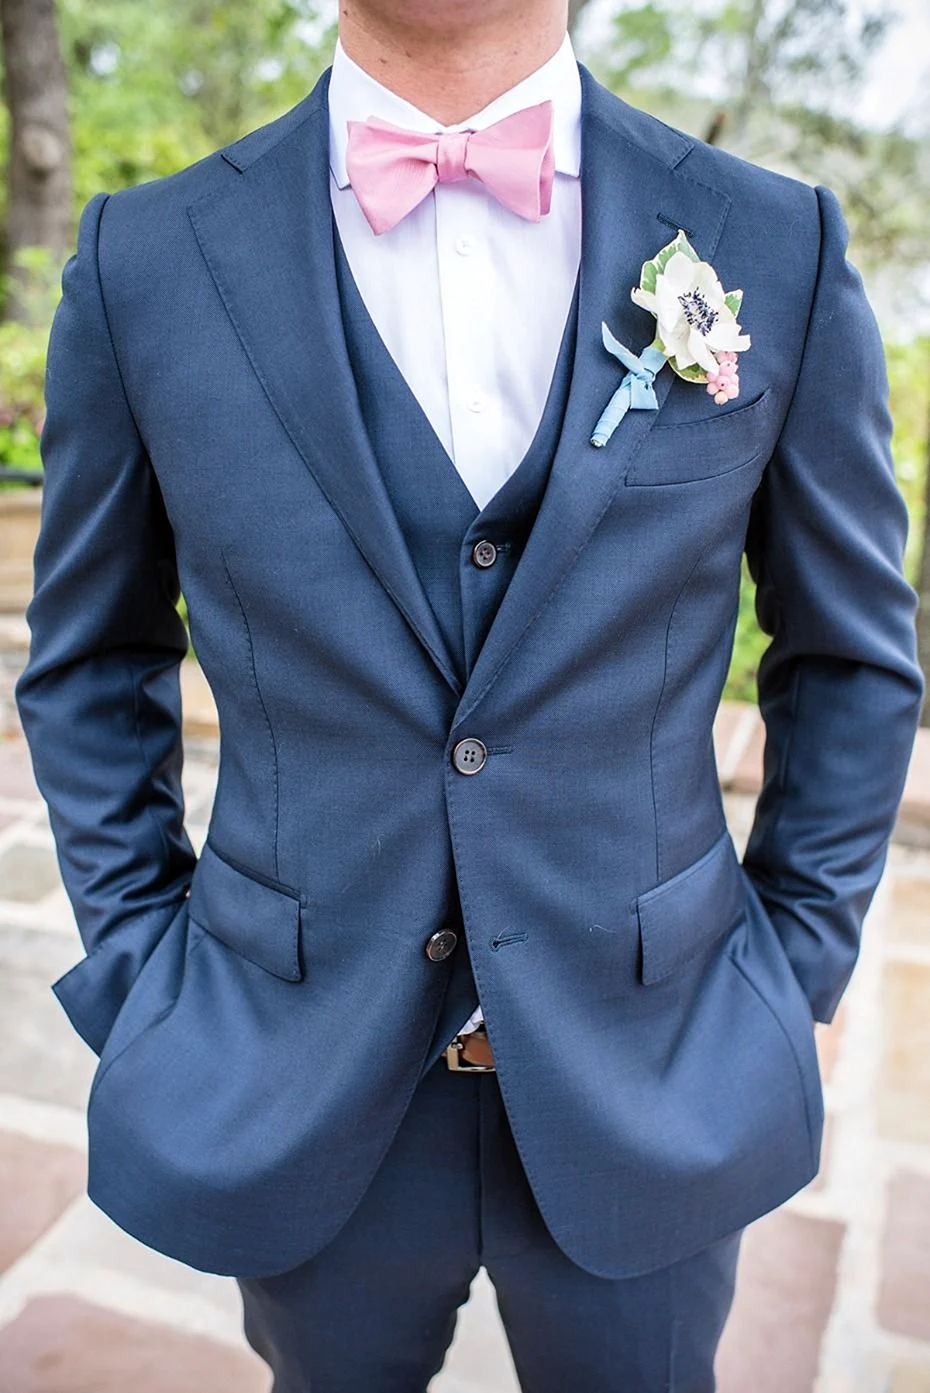 Navy Blue Tuxedo by Joseph Abboud with Pink Bow Tie